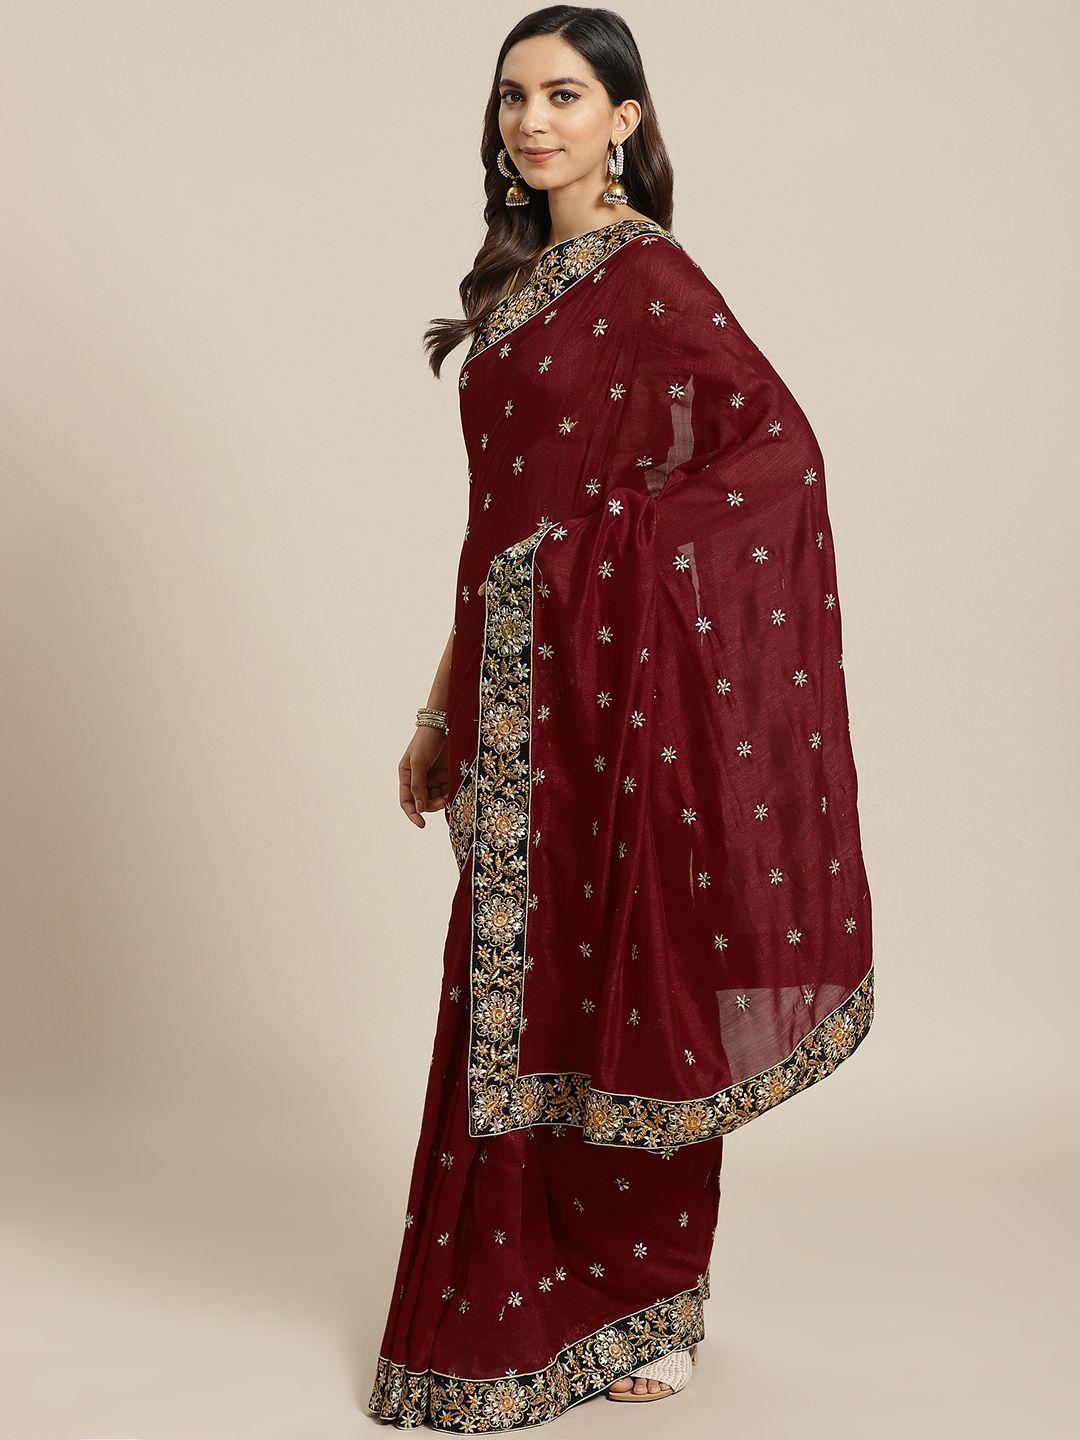 flaher maroon & golden embroidered saree